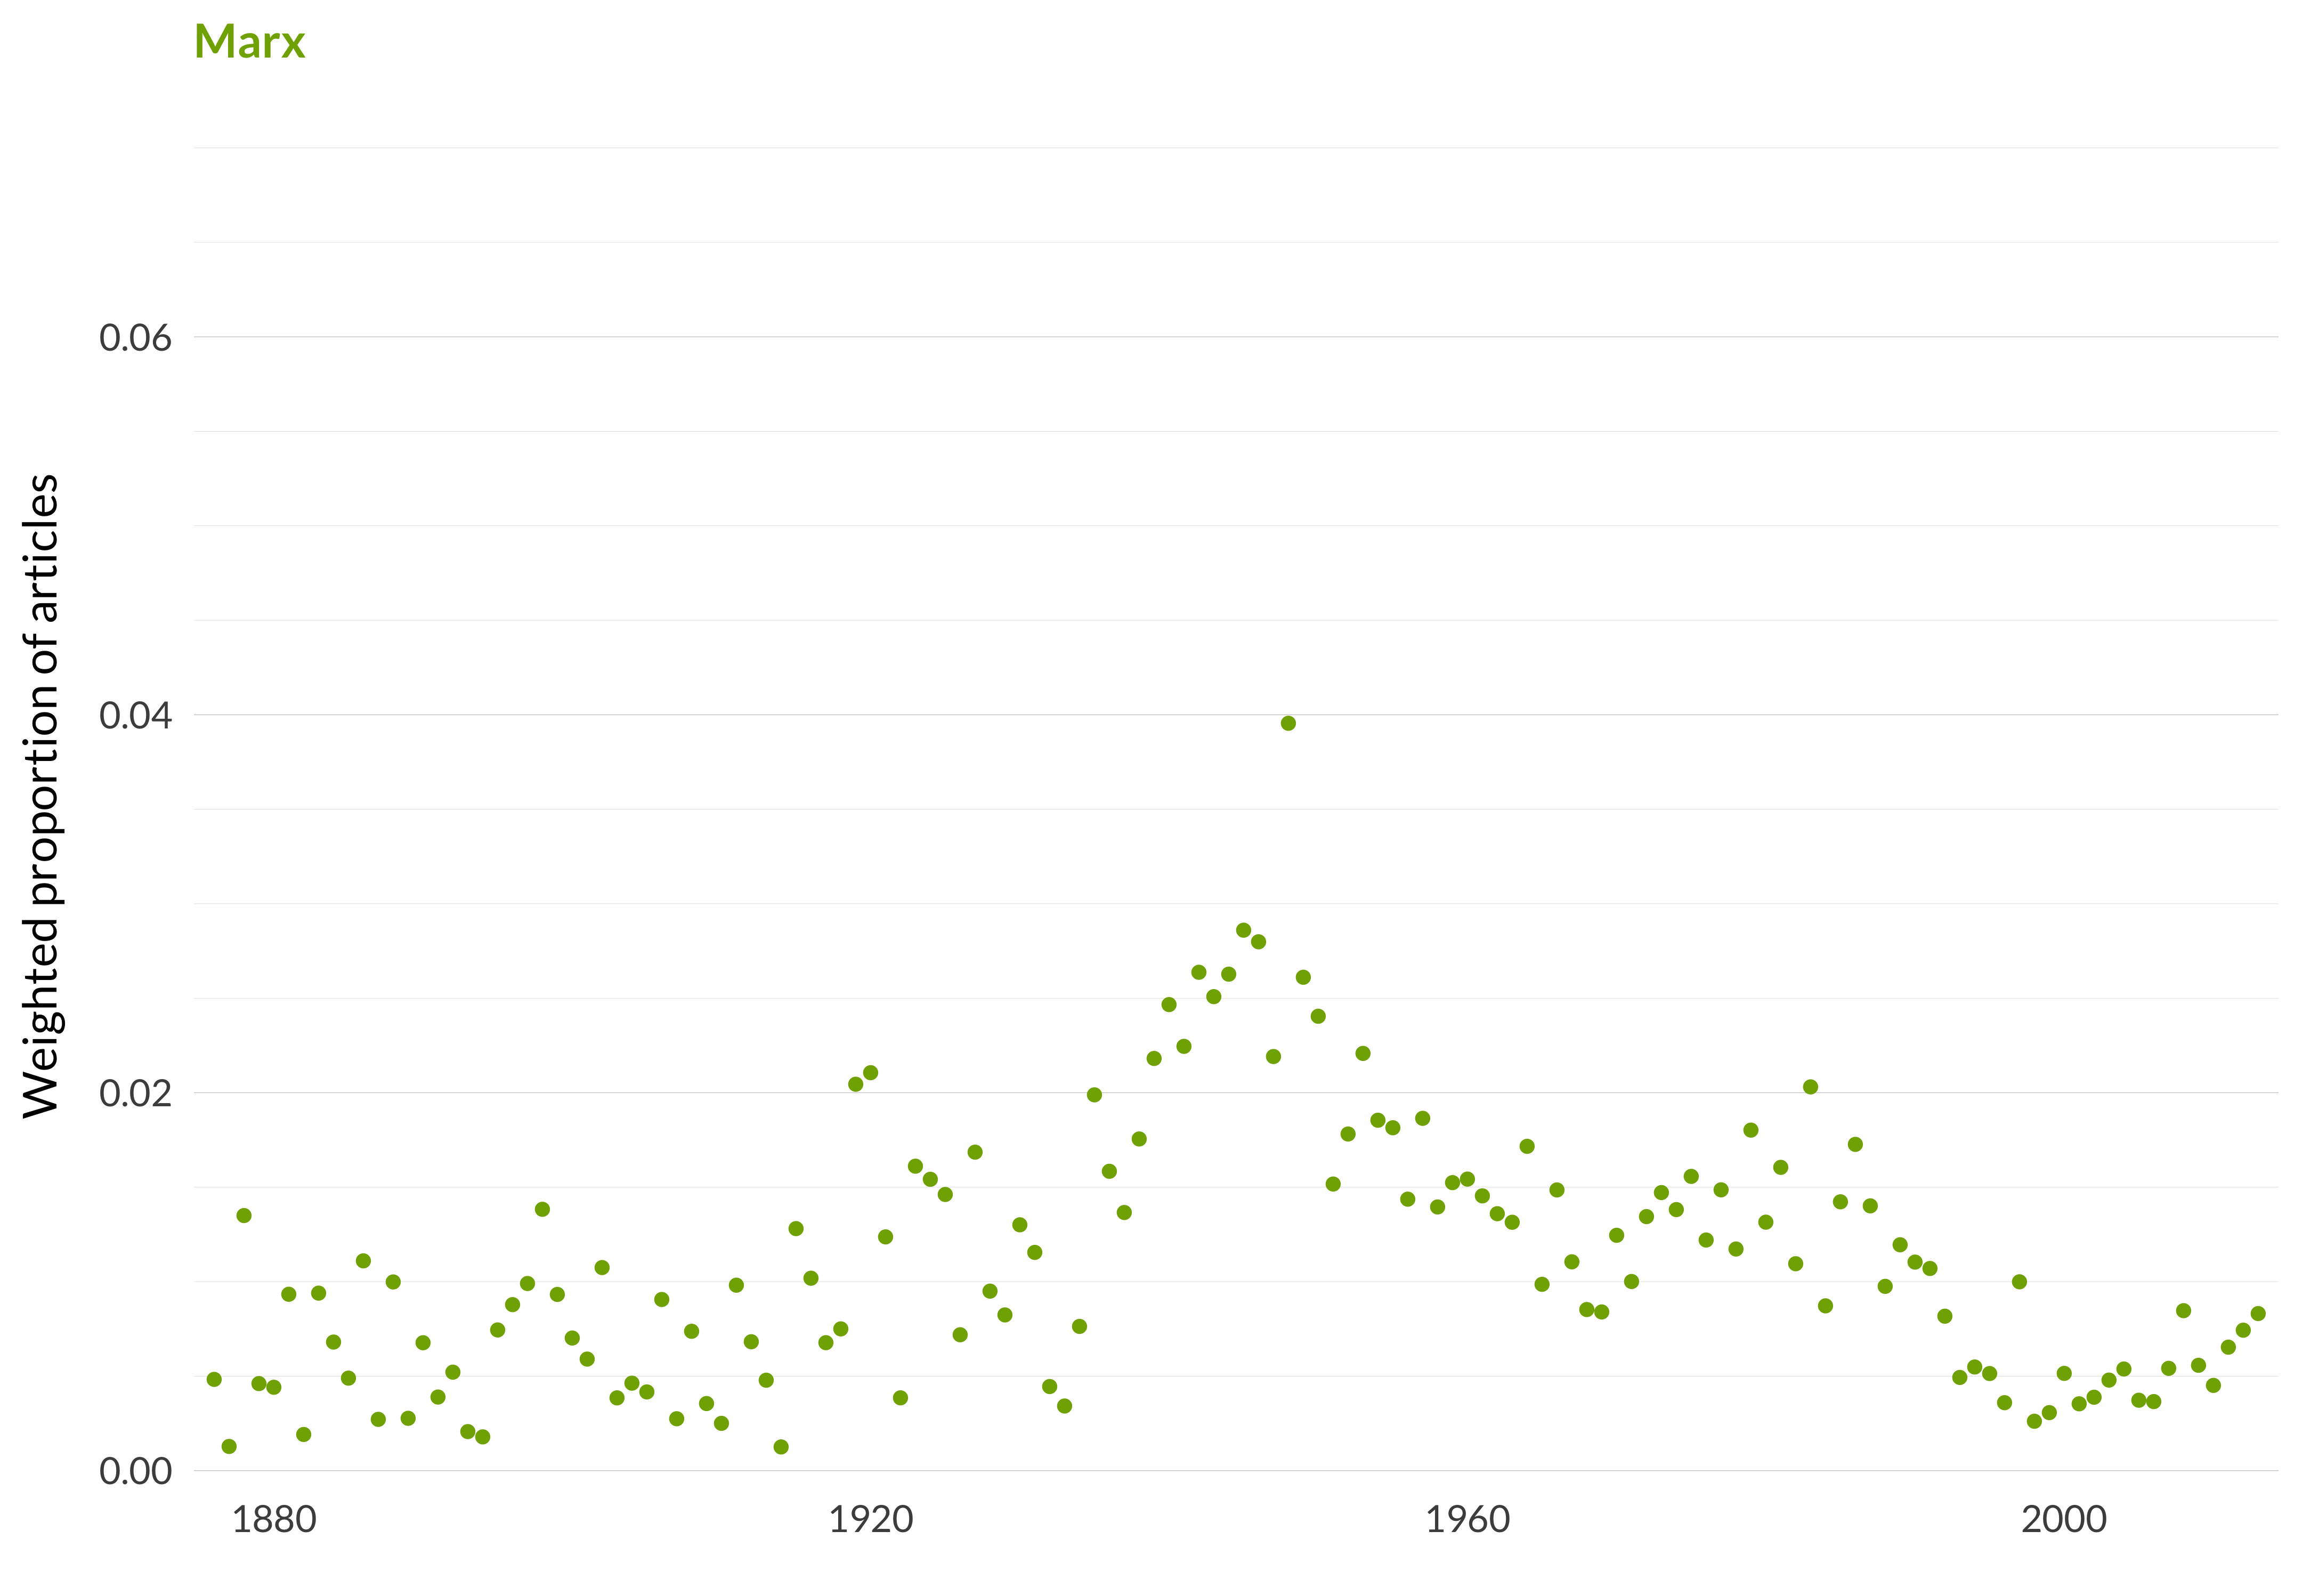 A scatterplot showing which proportion of articles each year are in the Marxtopic. The x-axis shows the year, the y-axis measures the proportion of articles each year in this topic. There is one dot per year. The highest value is in 1948 when 4.0% of articles were in this topic. The lowest value is in 1914 when 0.1% of articles were in this topic. The full table that provides the data for this graph is available in Table A.23 in Appendix A.